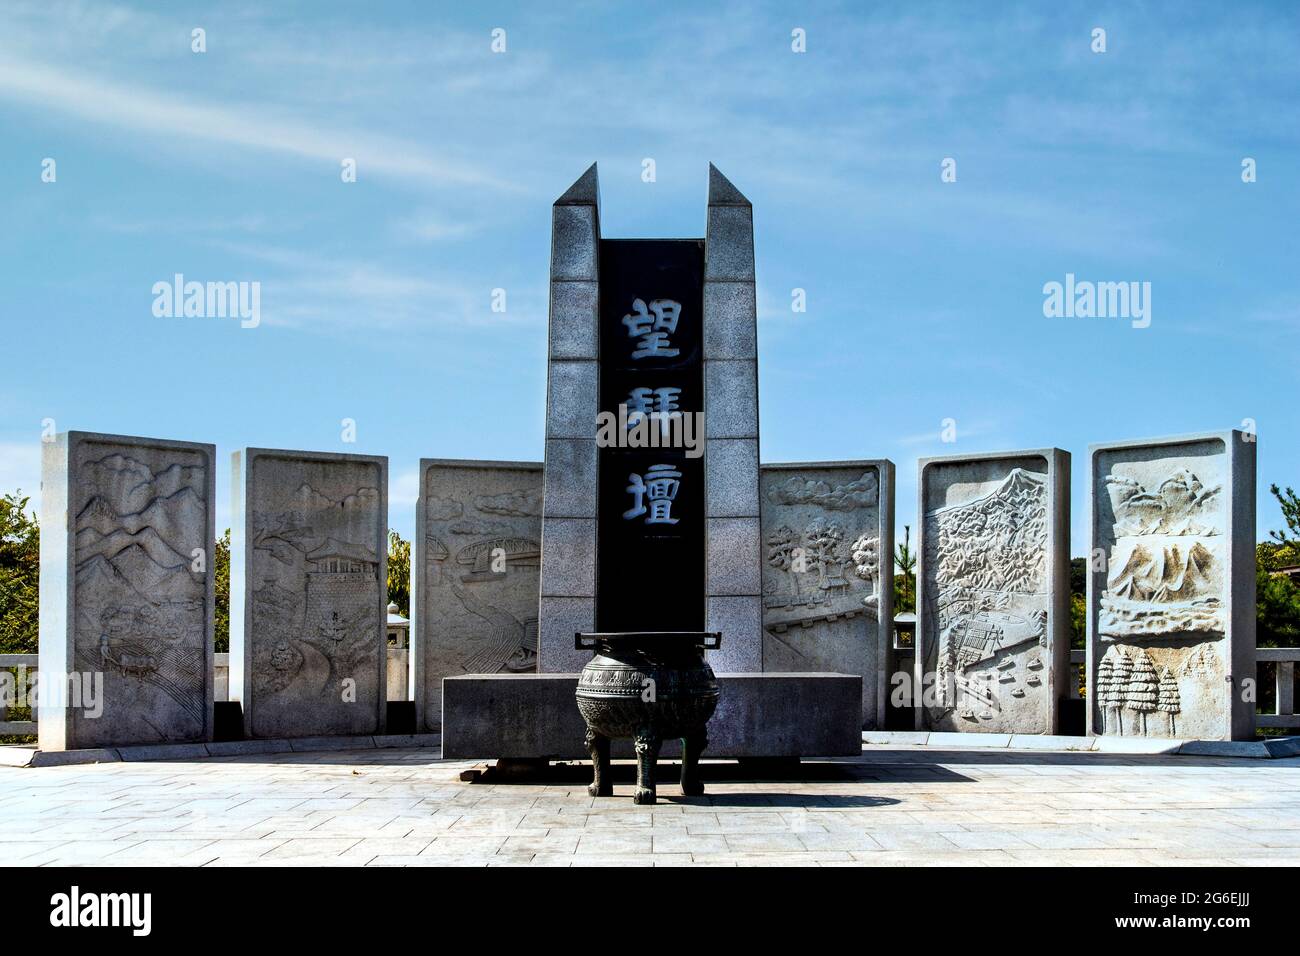 Mangbaedan Memorial Altar built by South Korean Government in 1985 symbolising the hope for reunification with North Korea Stock Photo